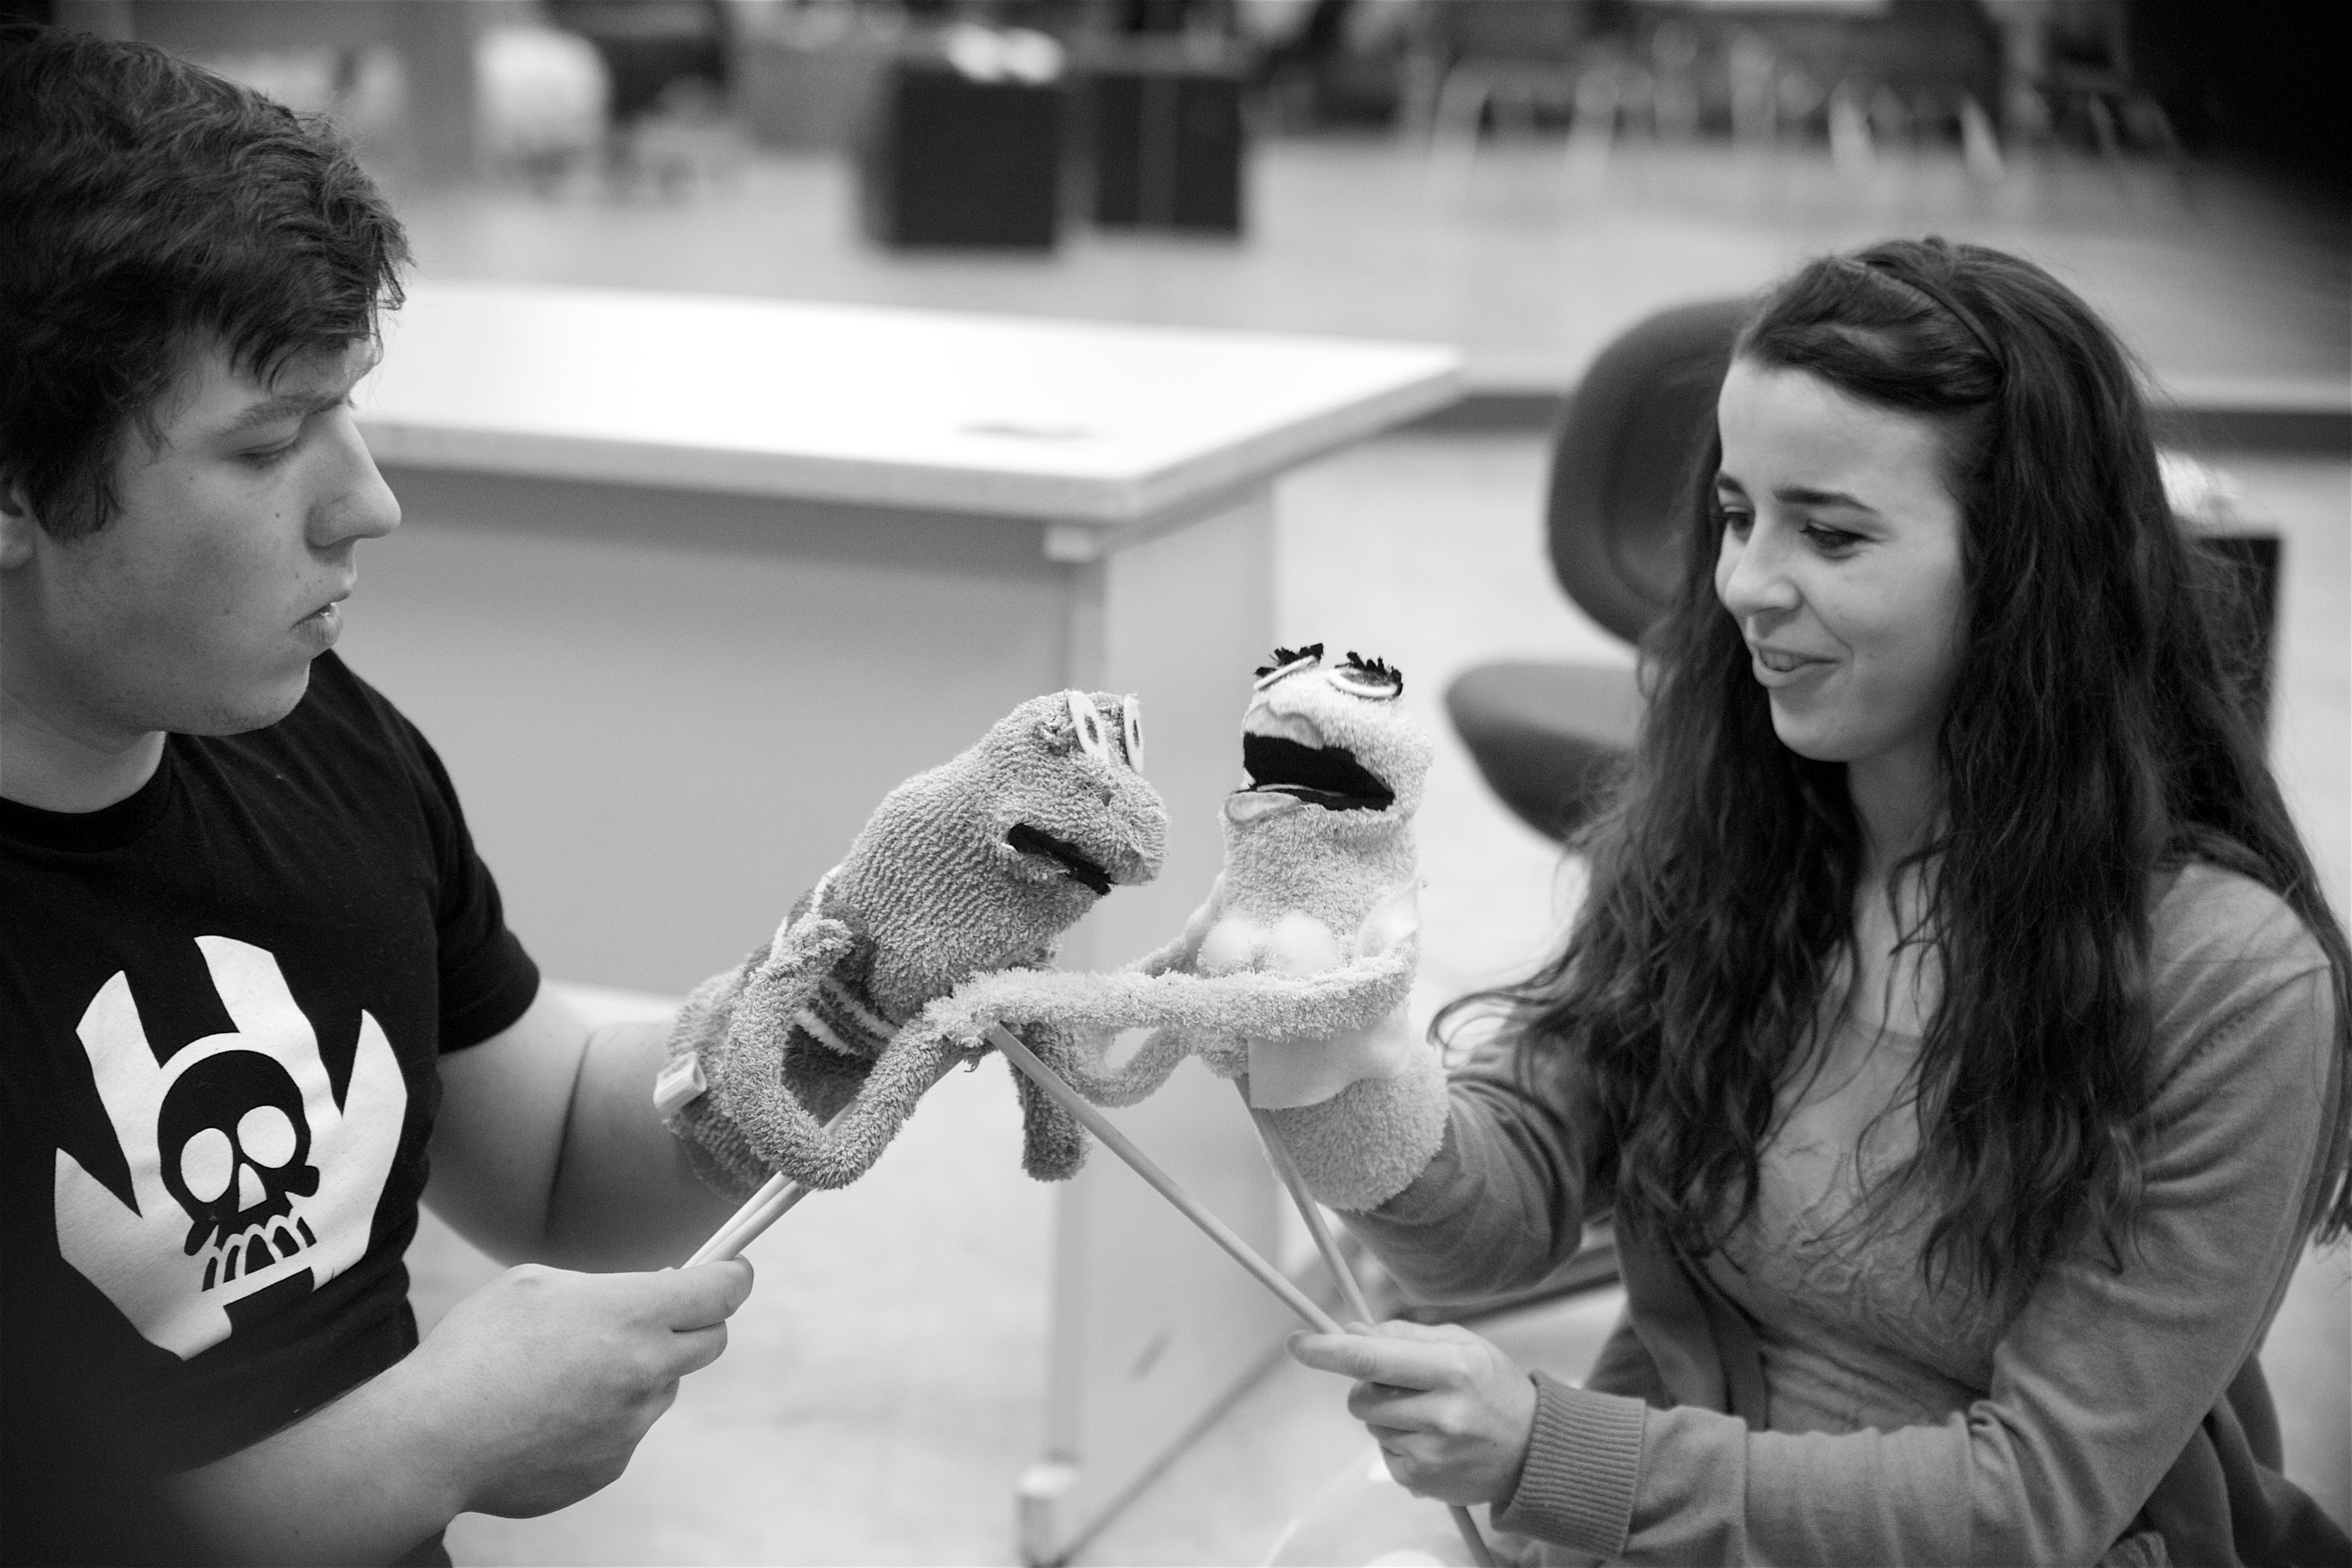 Puppet Therapy: “Hand to God” deals with grief through humor